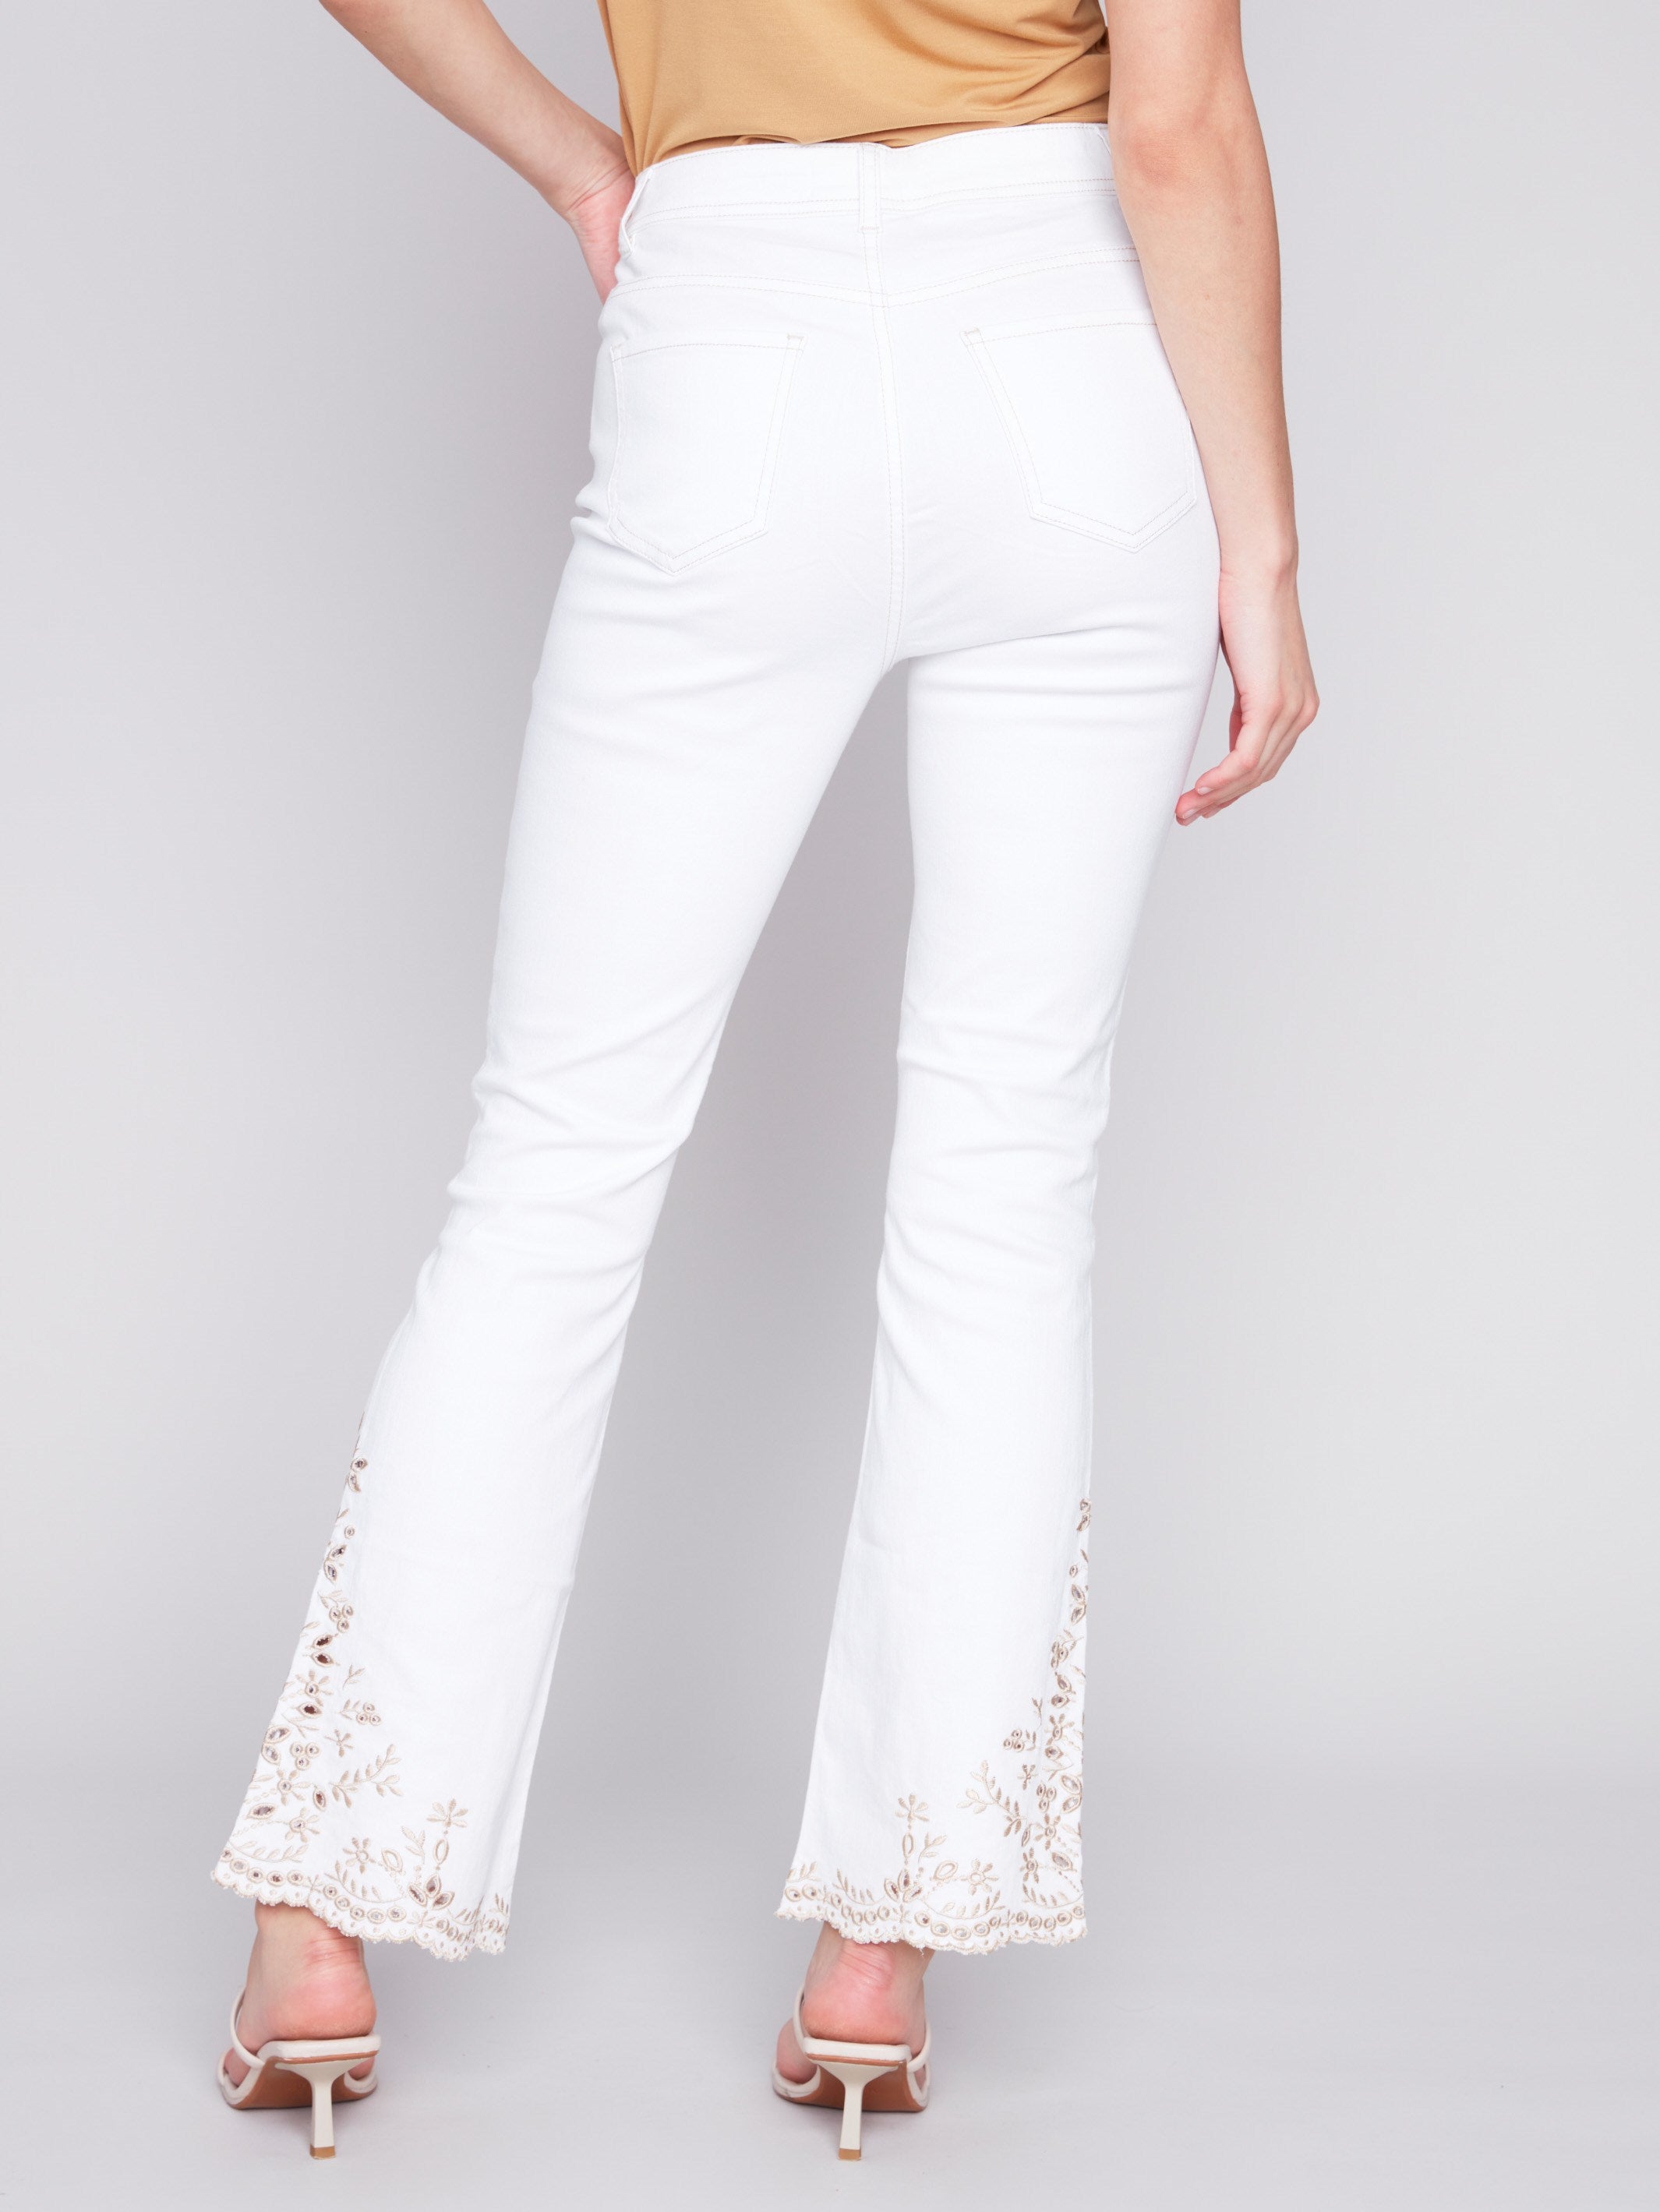 Bootcut Twill Jeans with Embroidery - White - Charlie B Collection Canada - Image 3